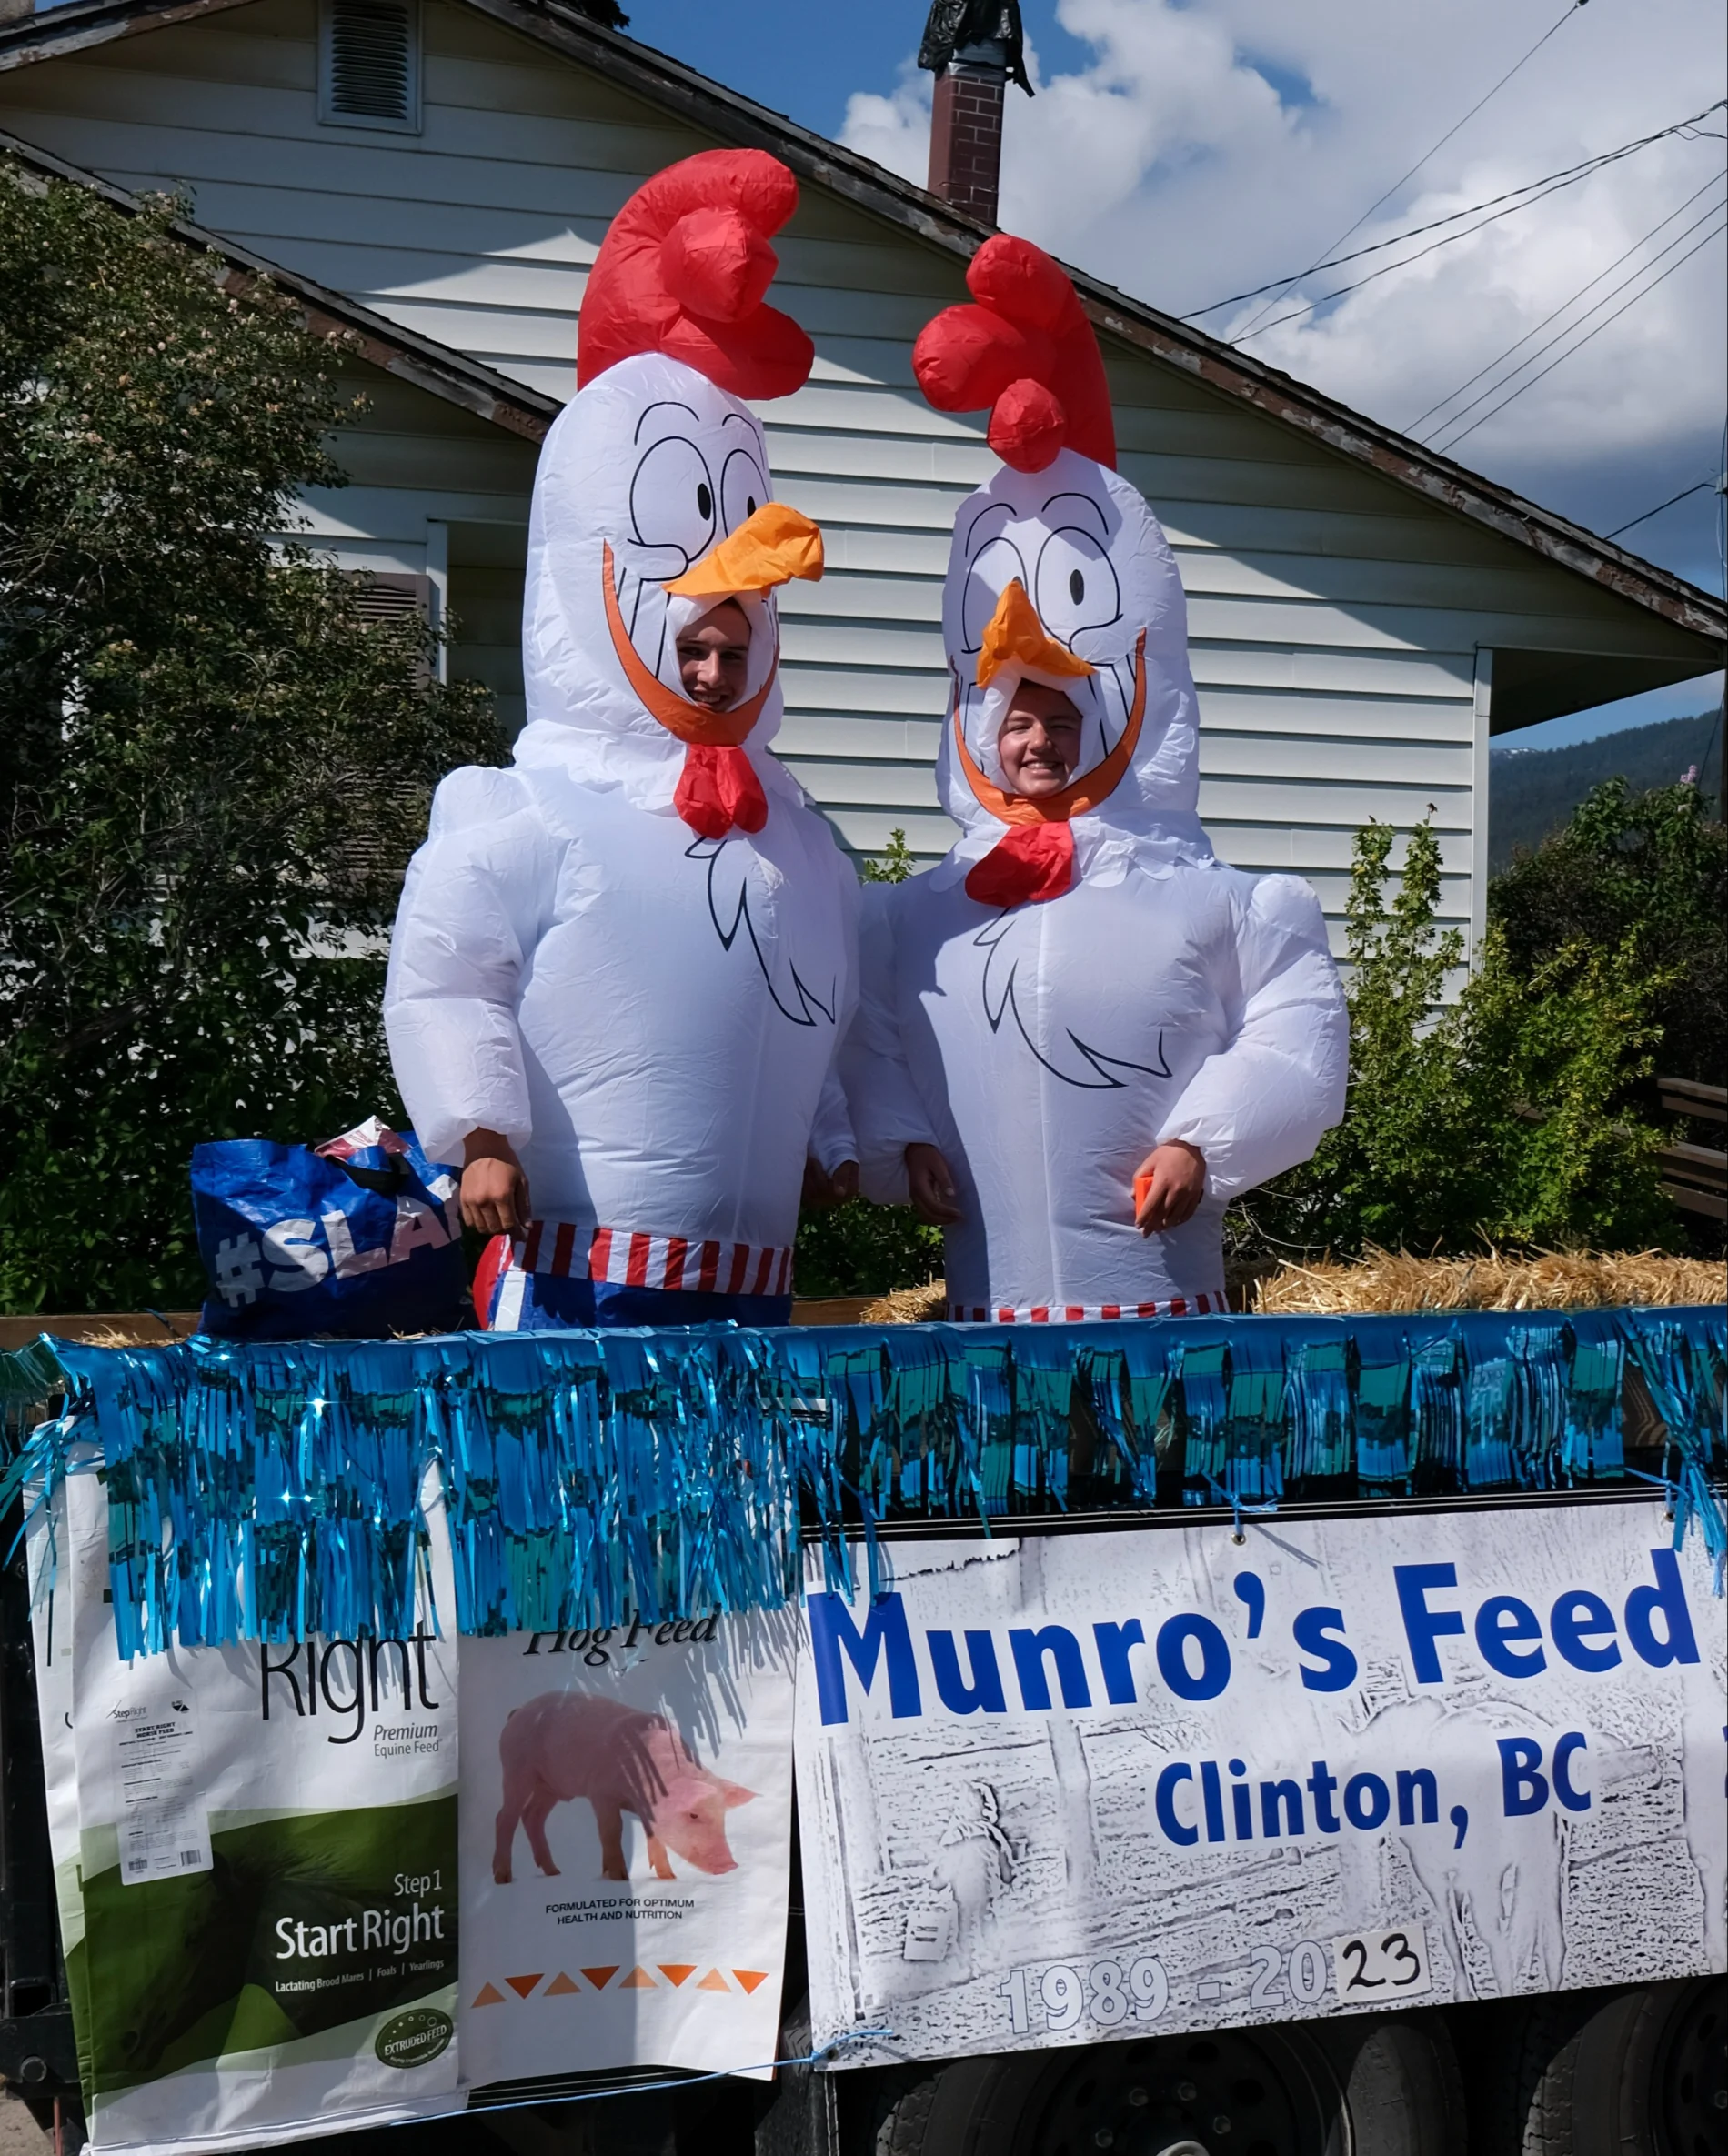 Staff from Munro’s Feed in Clinton dressed as chickens on their business’s parade float. 